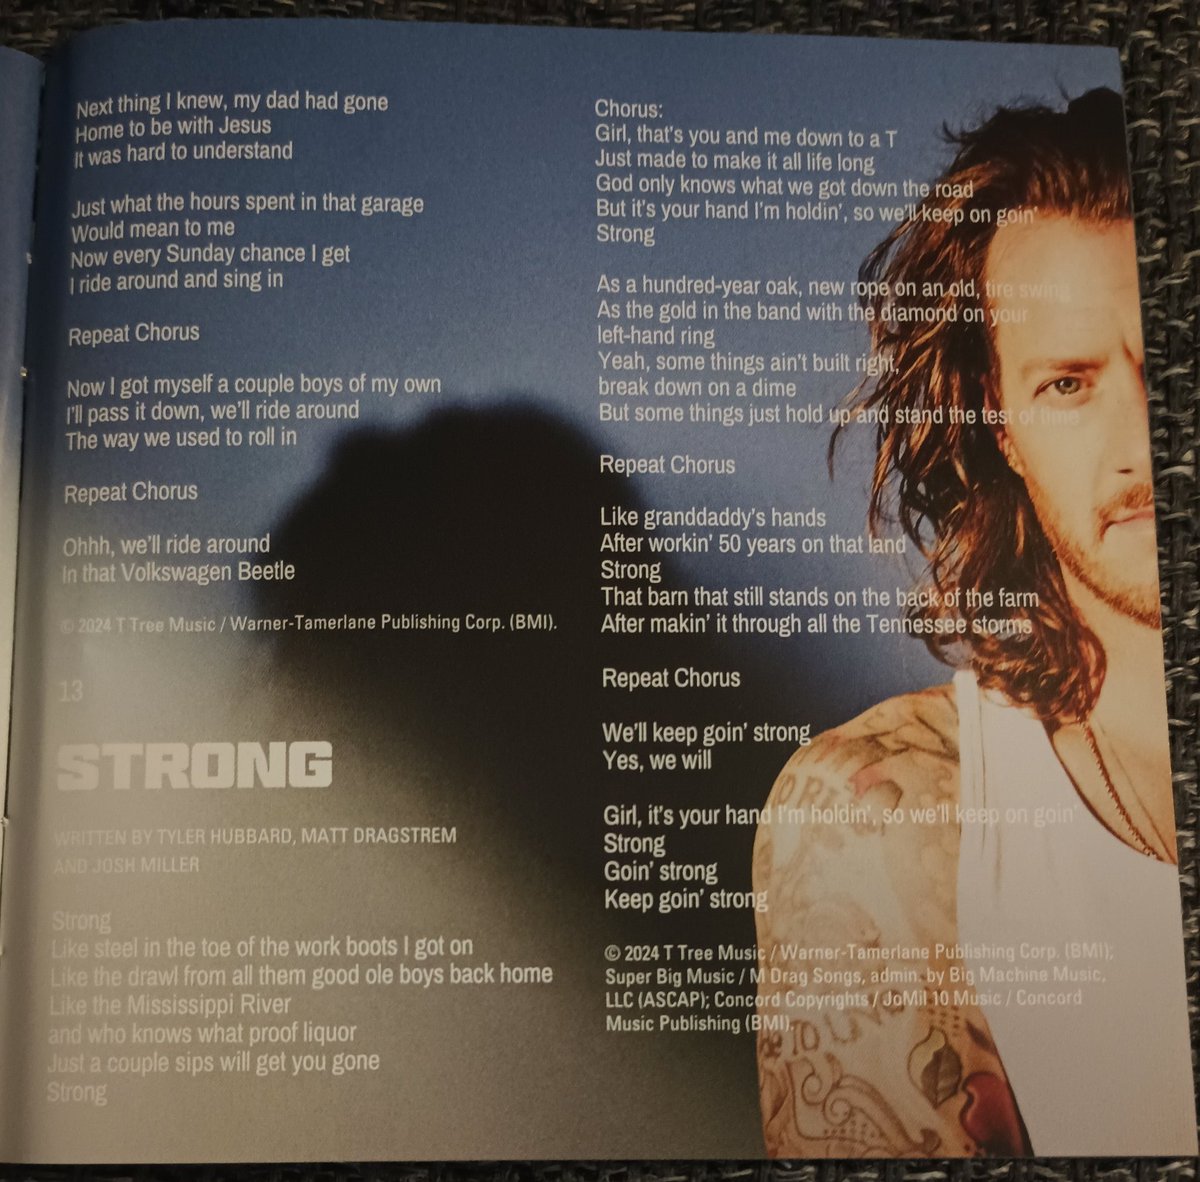 #countrymusic #country #music #artistspotlight #tylerhubbard #strong #thereviewissoon